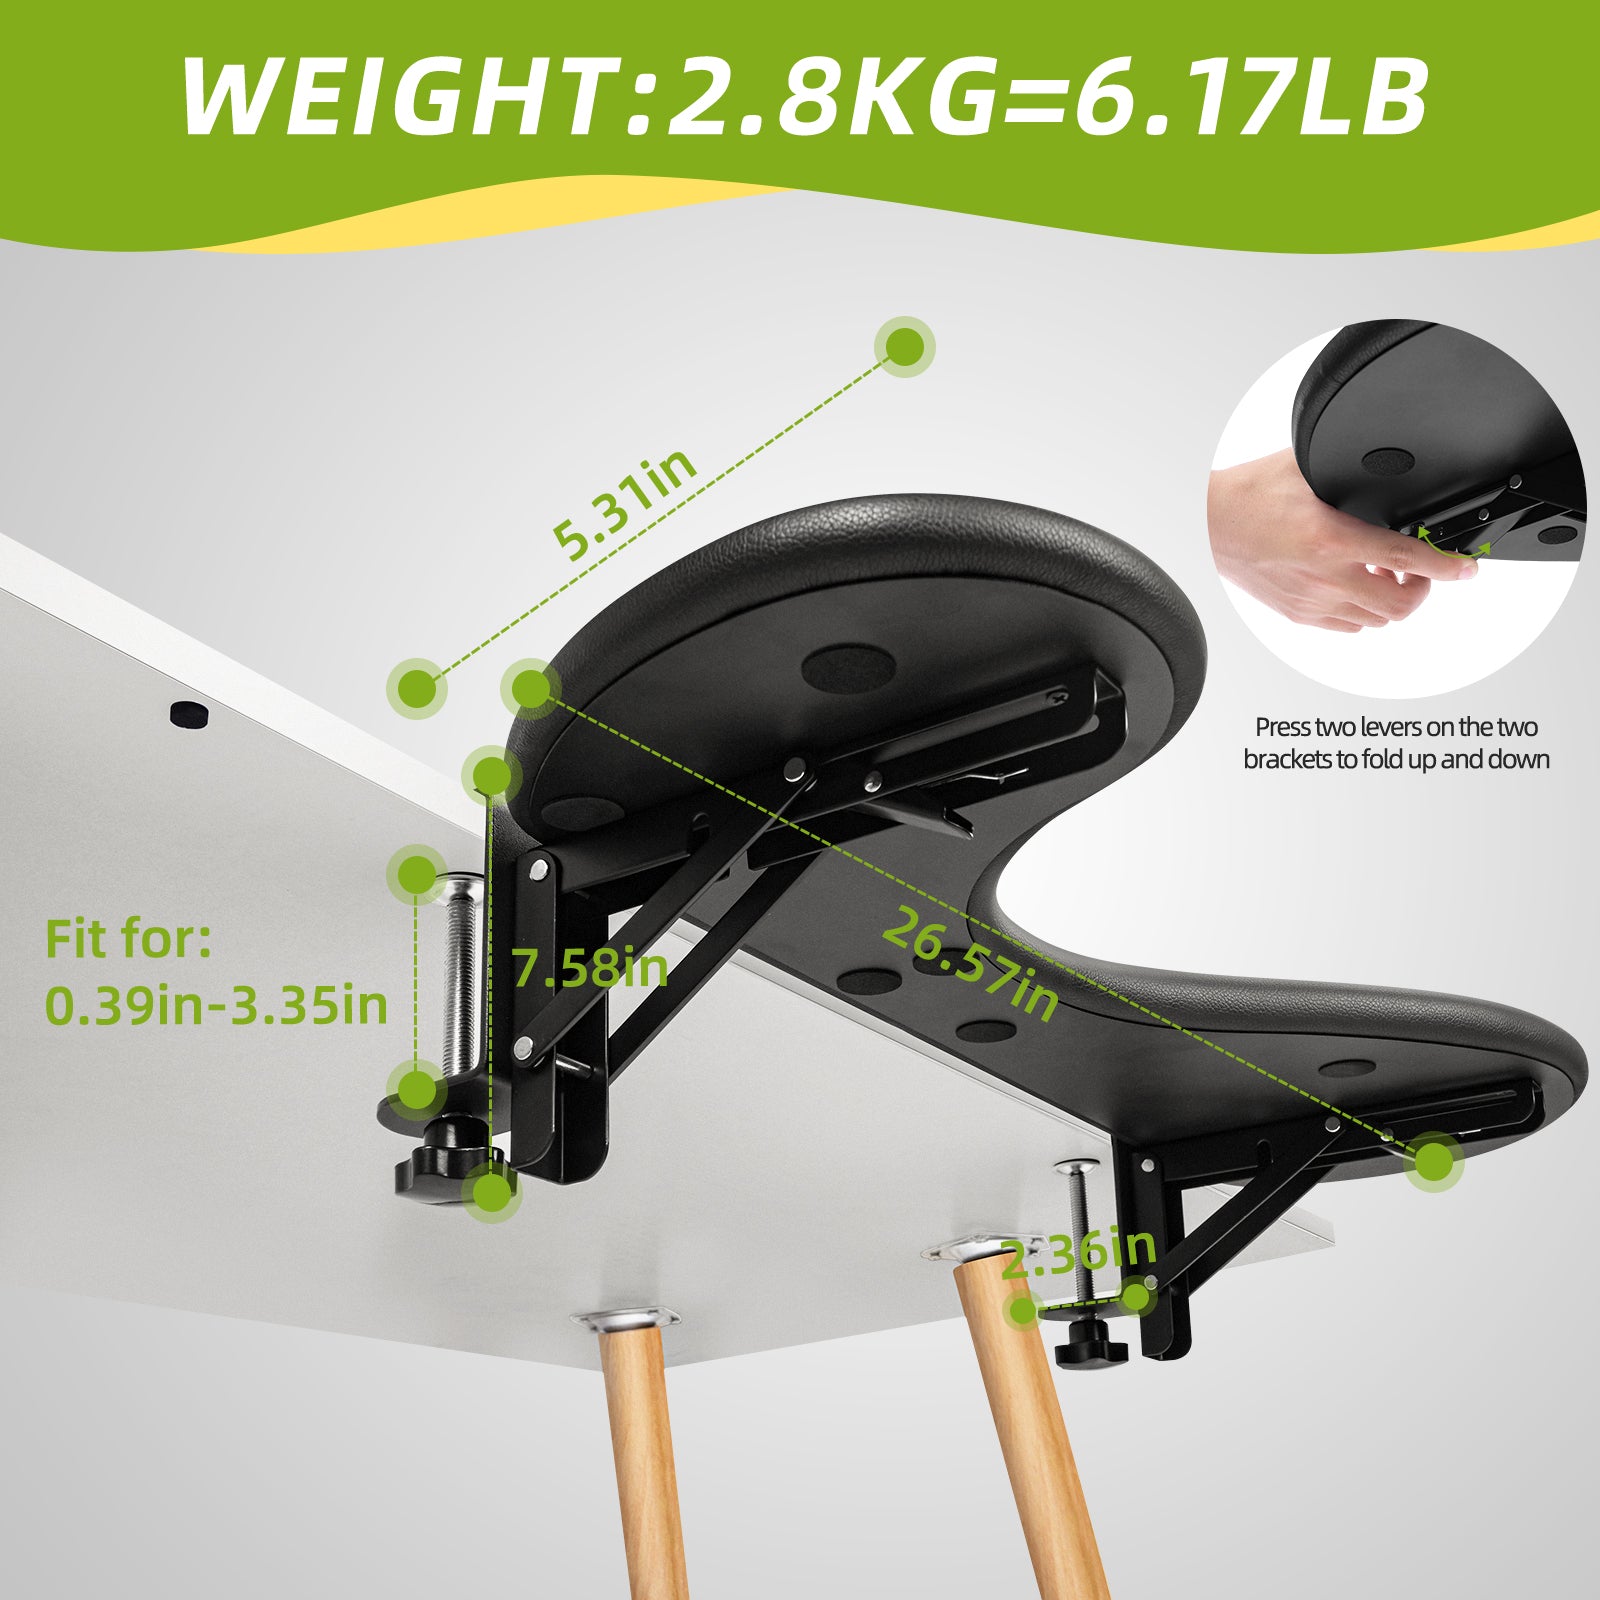 Foldable Desk Extender Tray, Giecy Arm Rest for Desk, Ergonomic Forearm Leather Soft Armrest Support, Wrist & Elbow Pad for Home and Office, Easy Typing & Pain Relief (Above Desk)